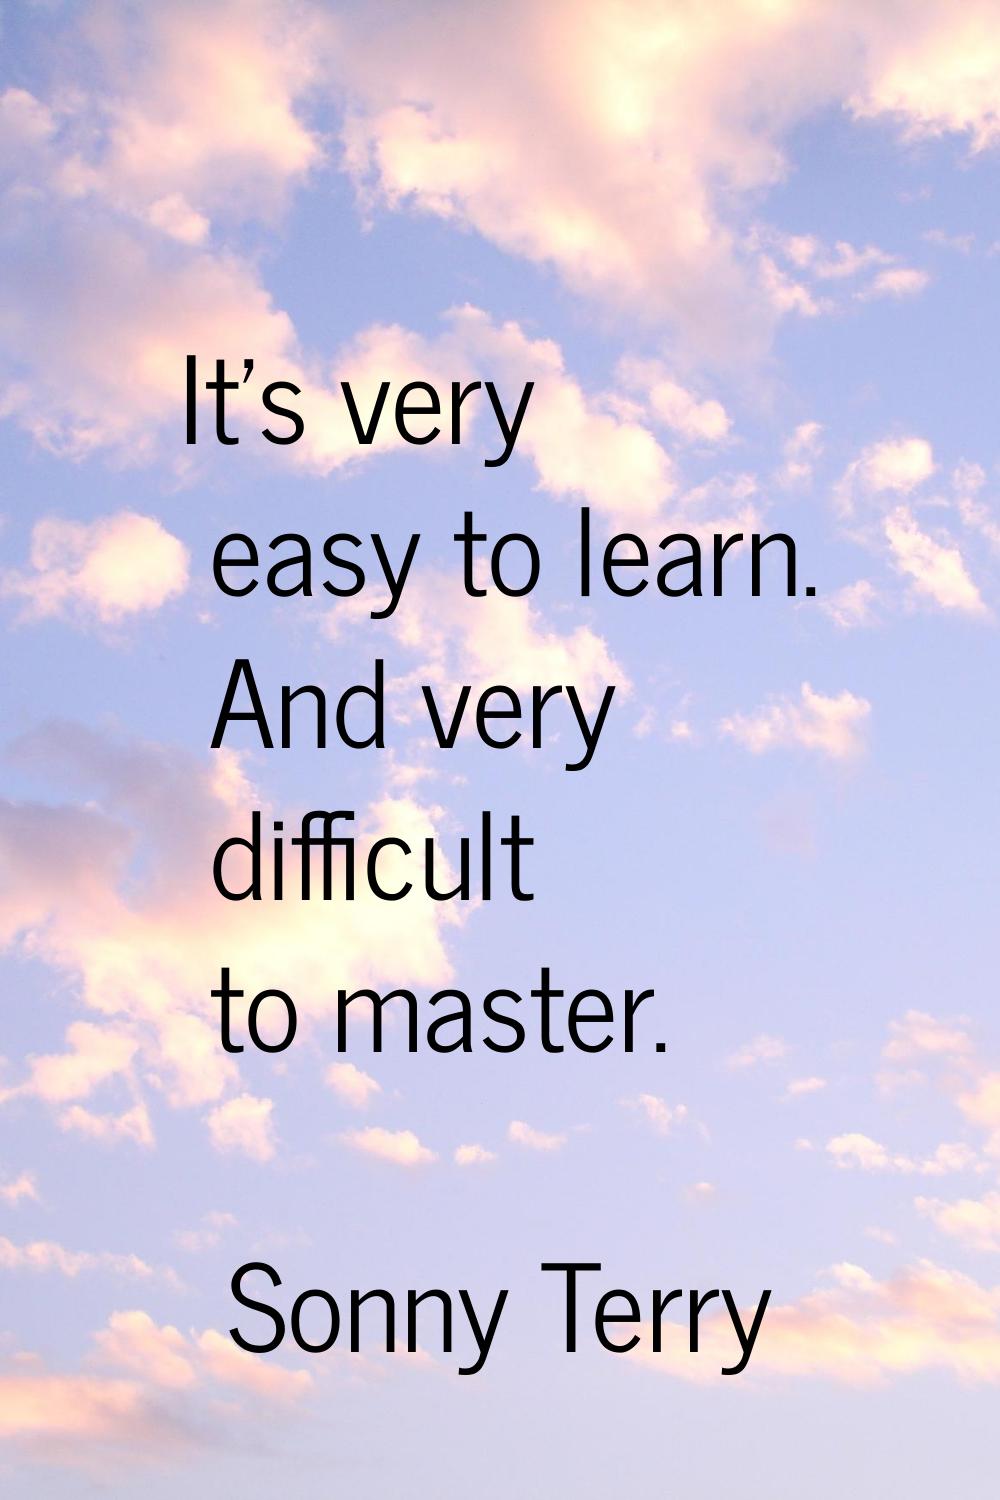 It's very easy to learn. And very difficult to master.